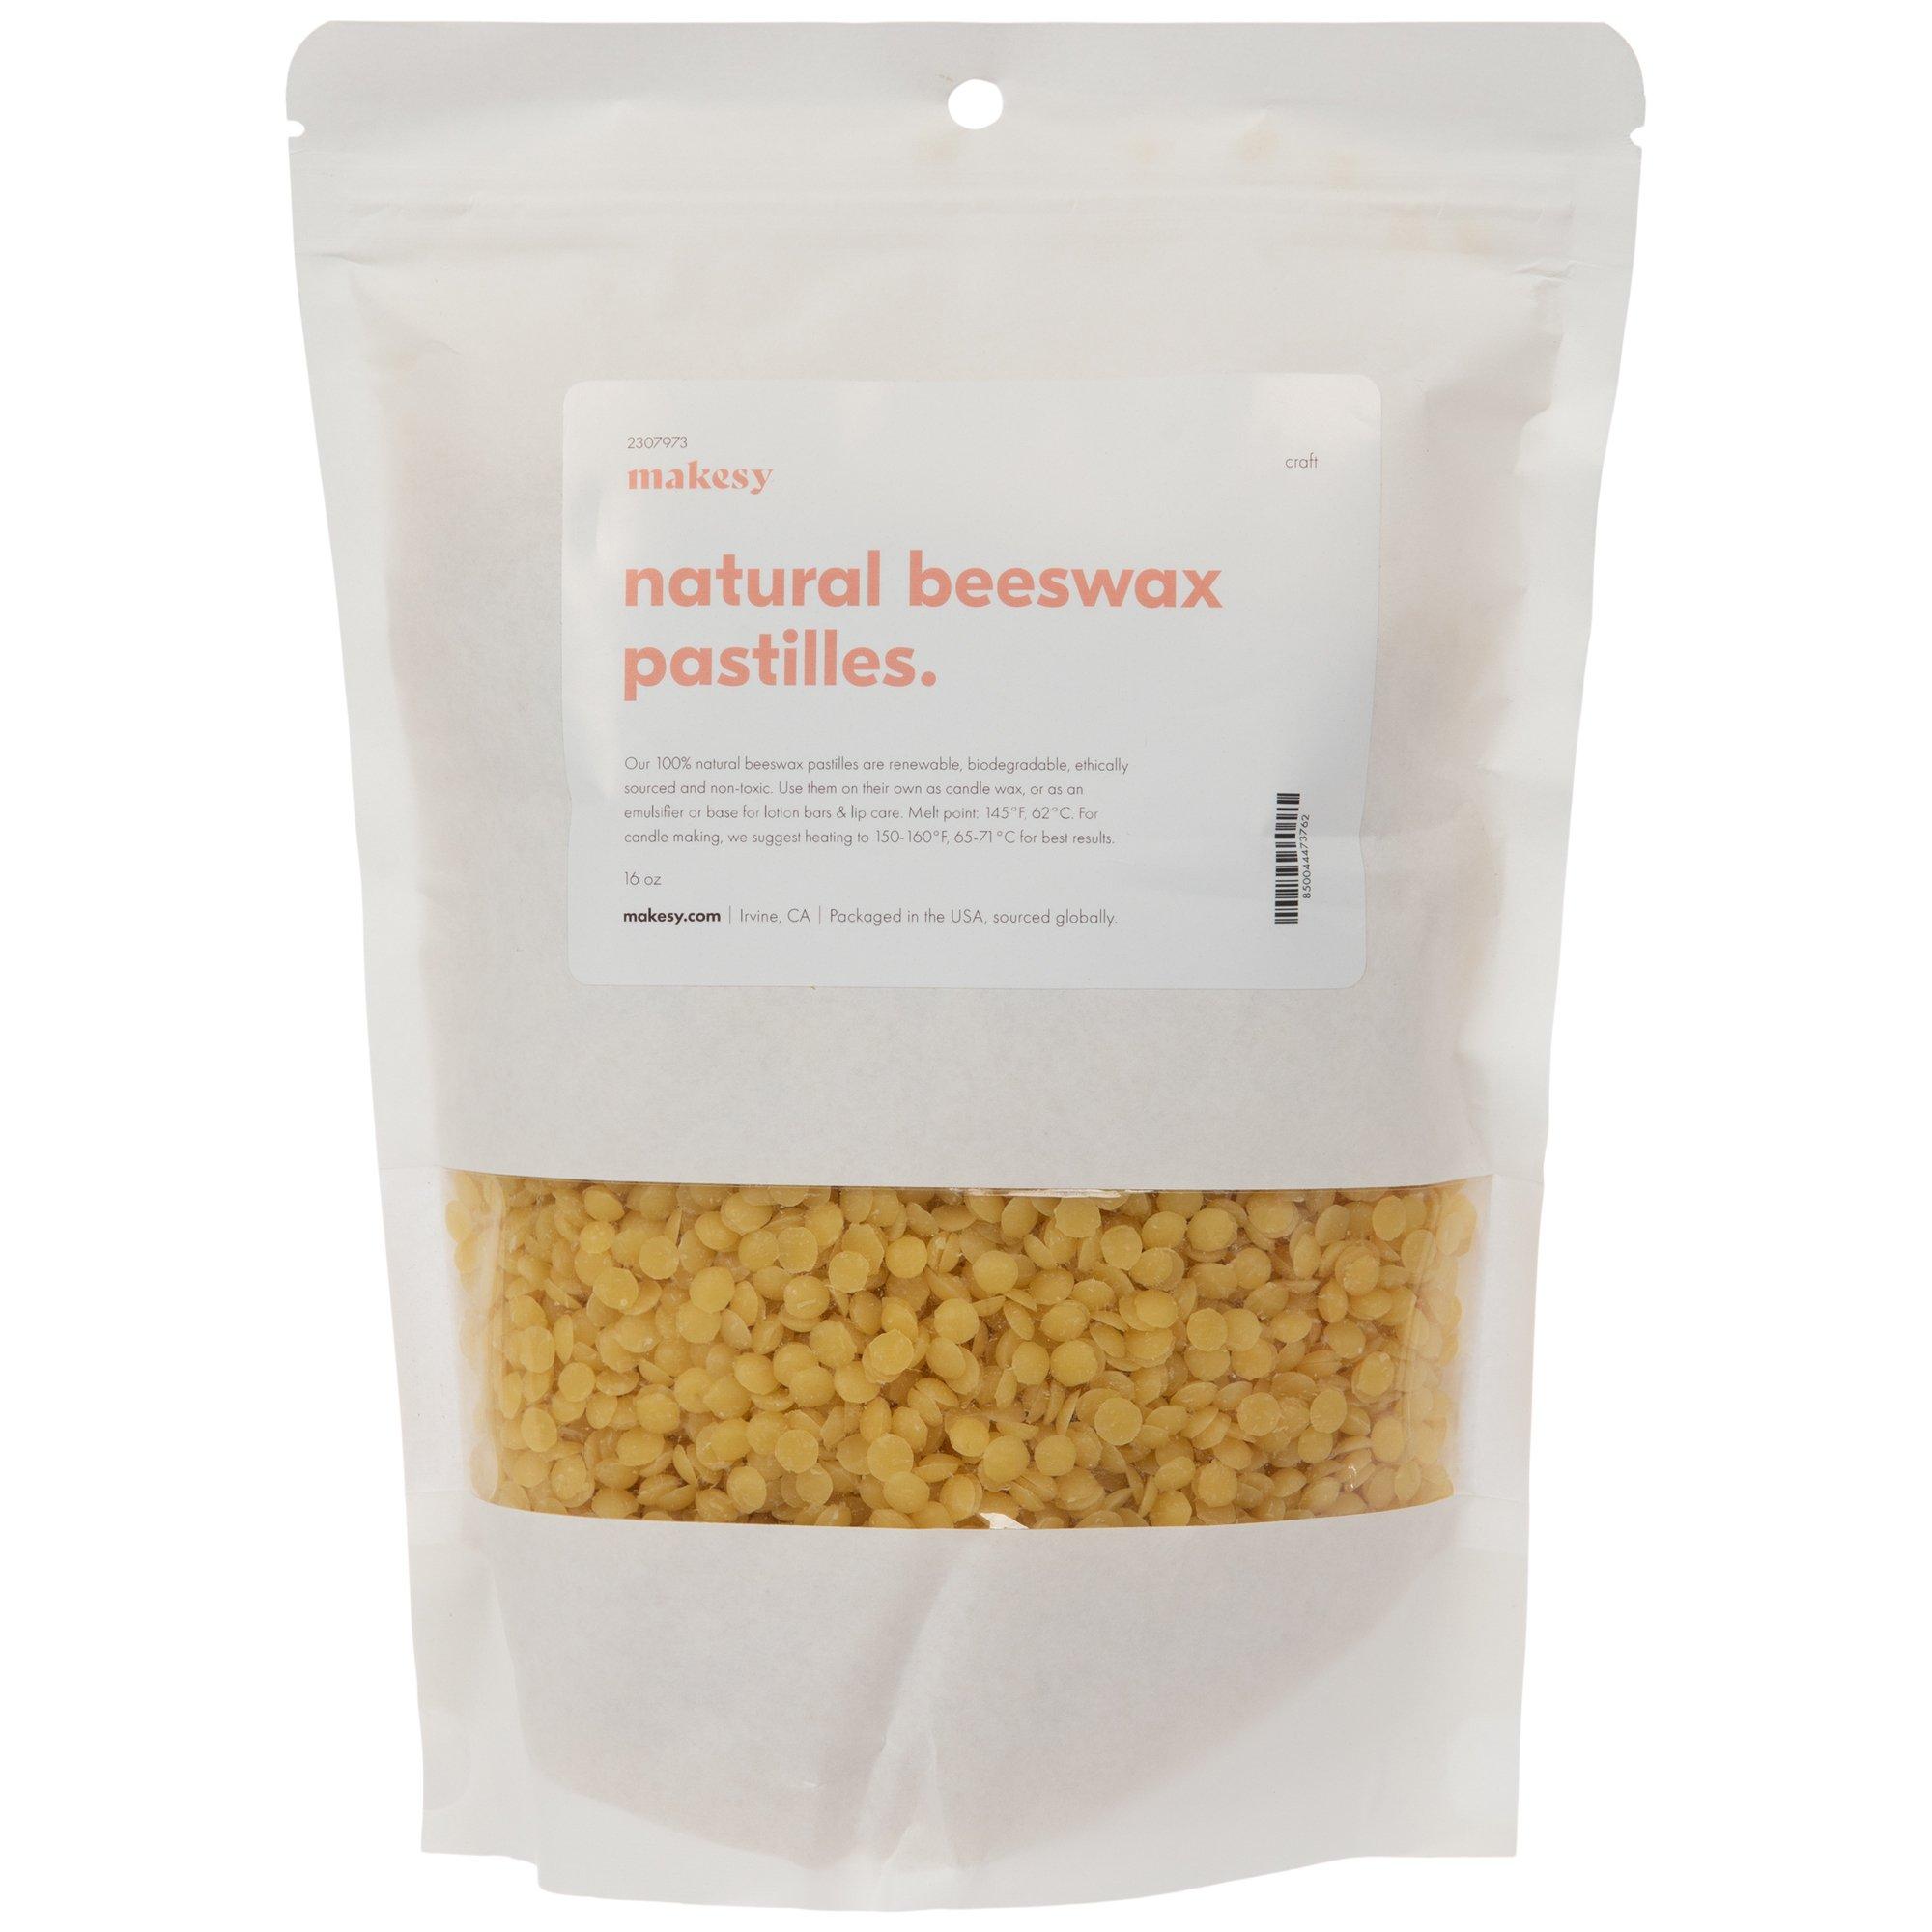 How To Make Beeswax Pellets at Home 